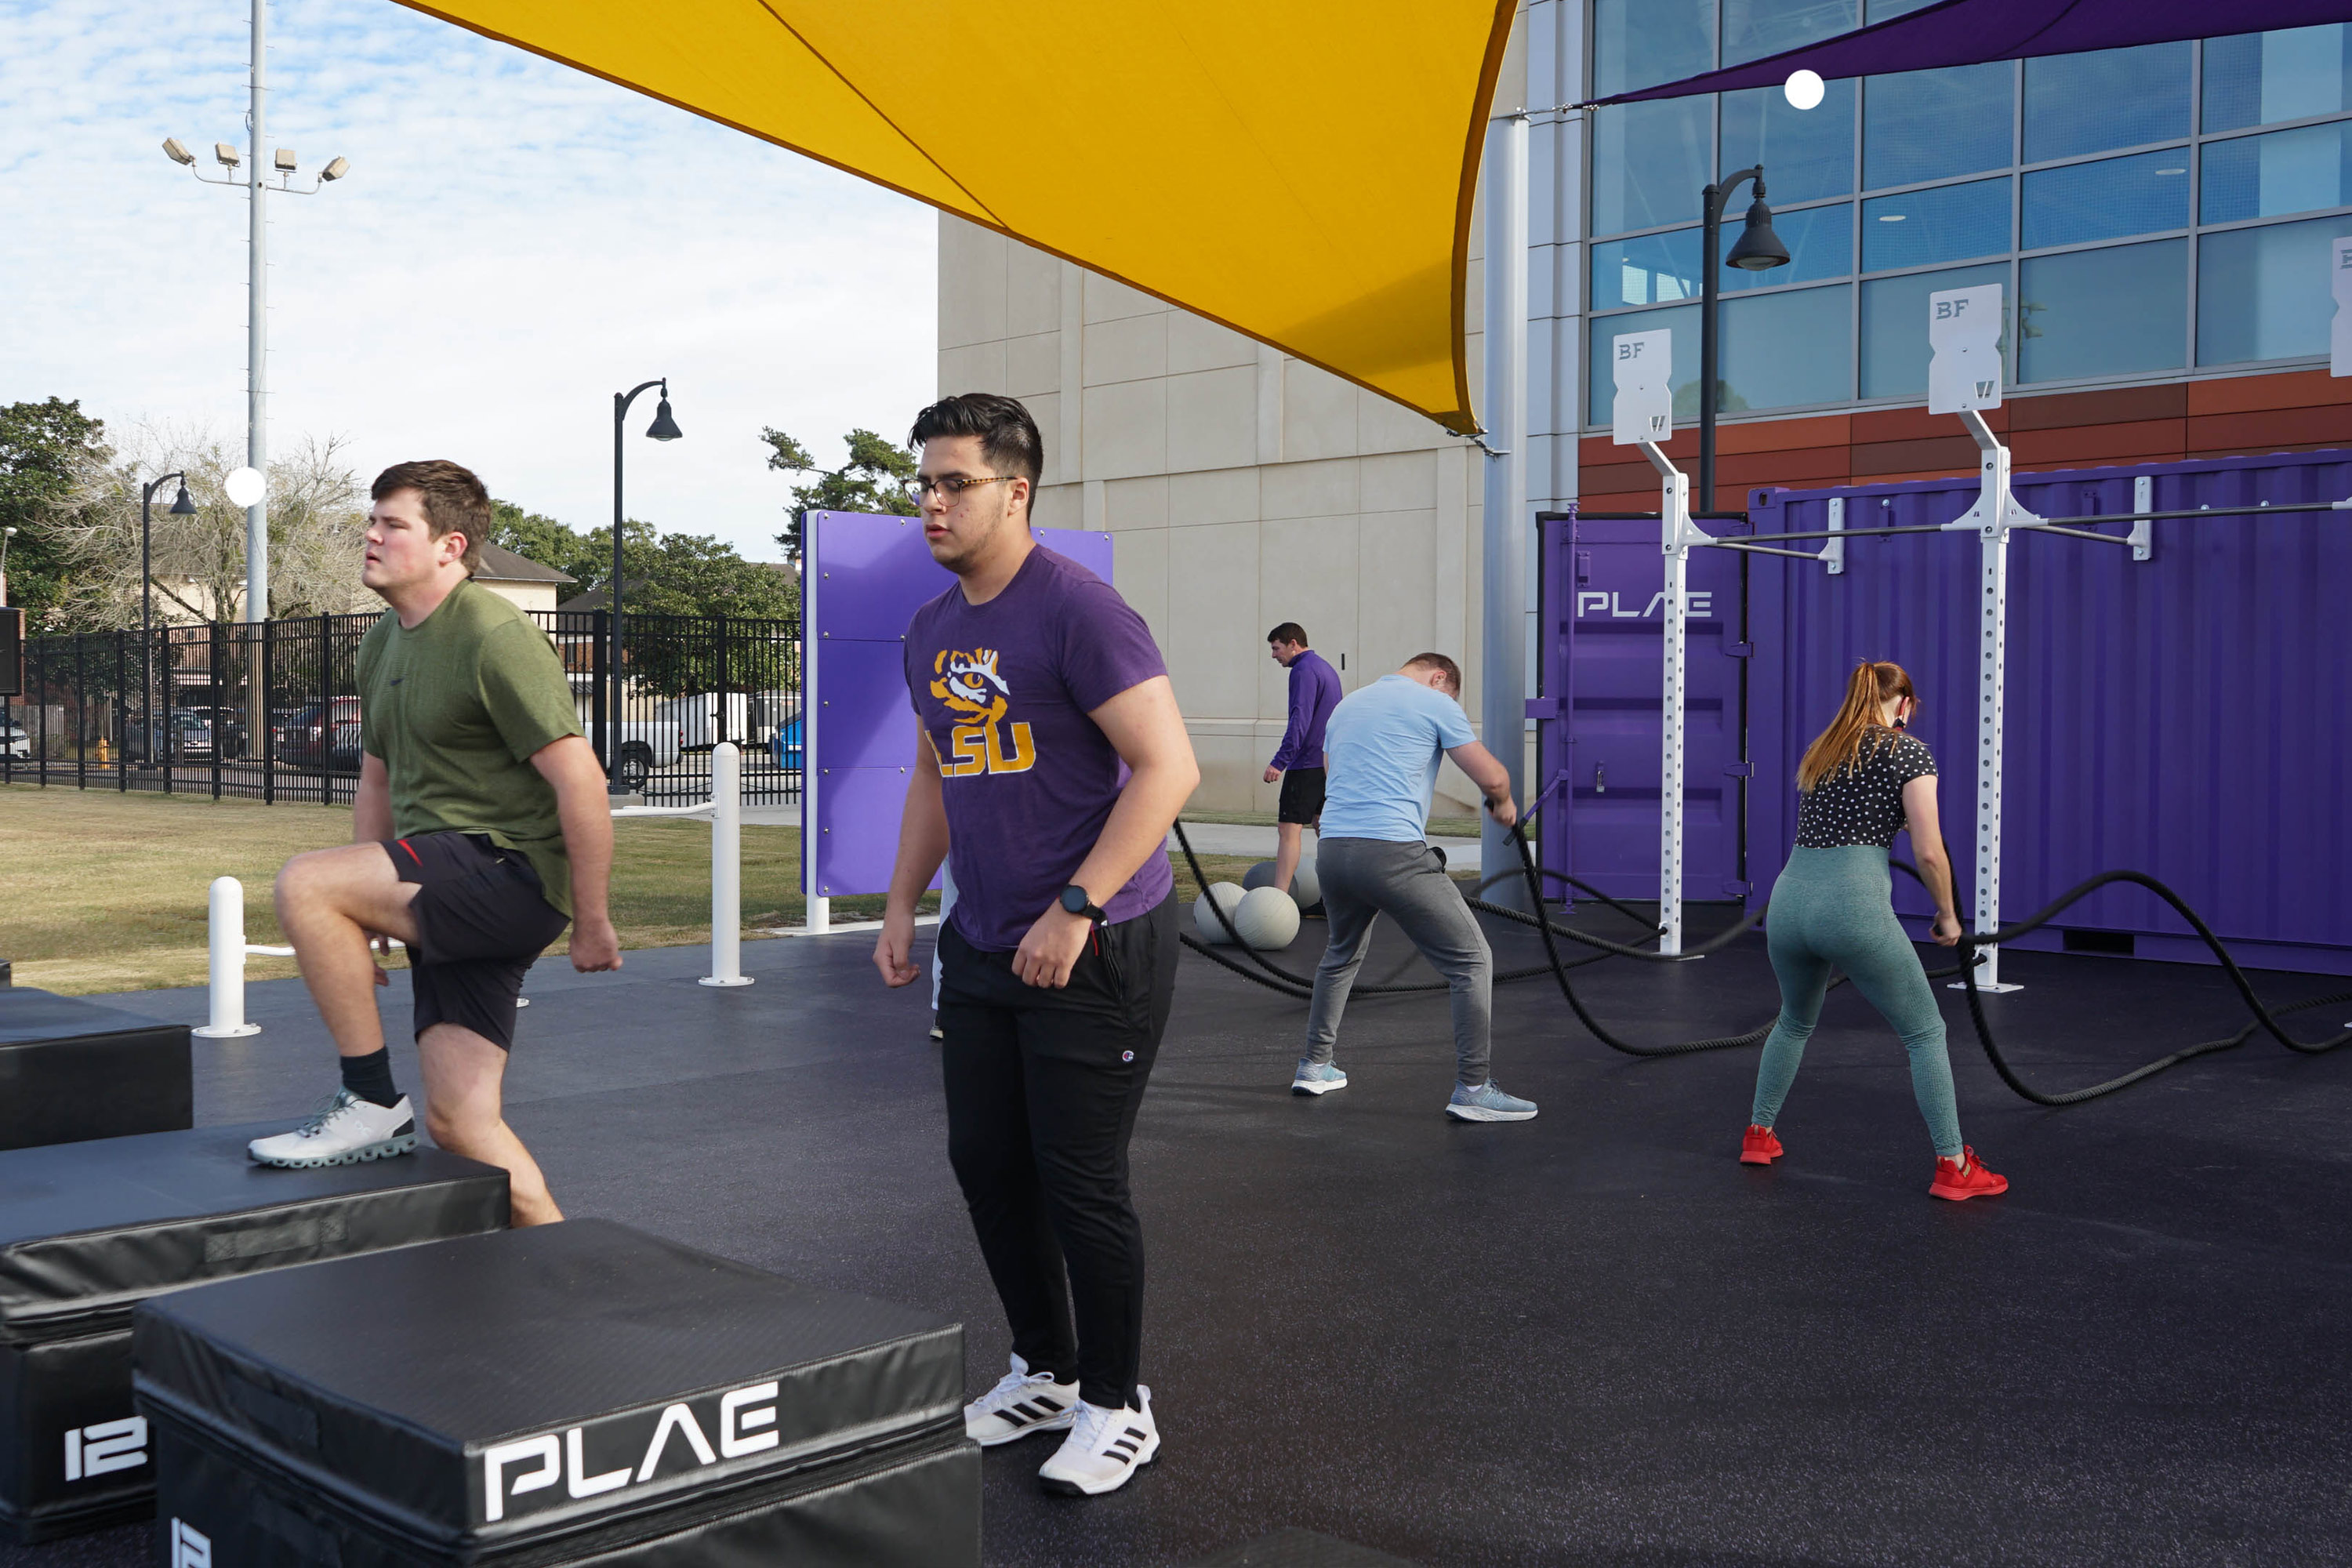 patrons getting a workout in in outdoor fitness area